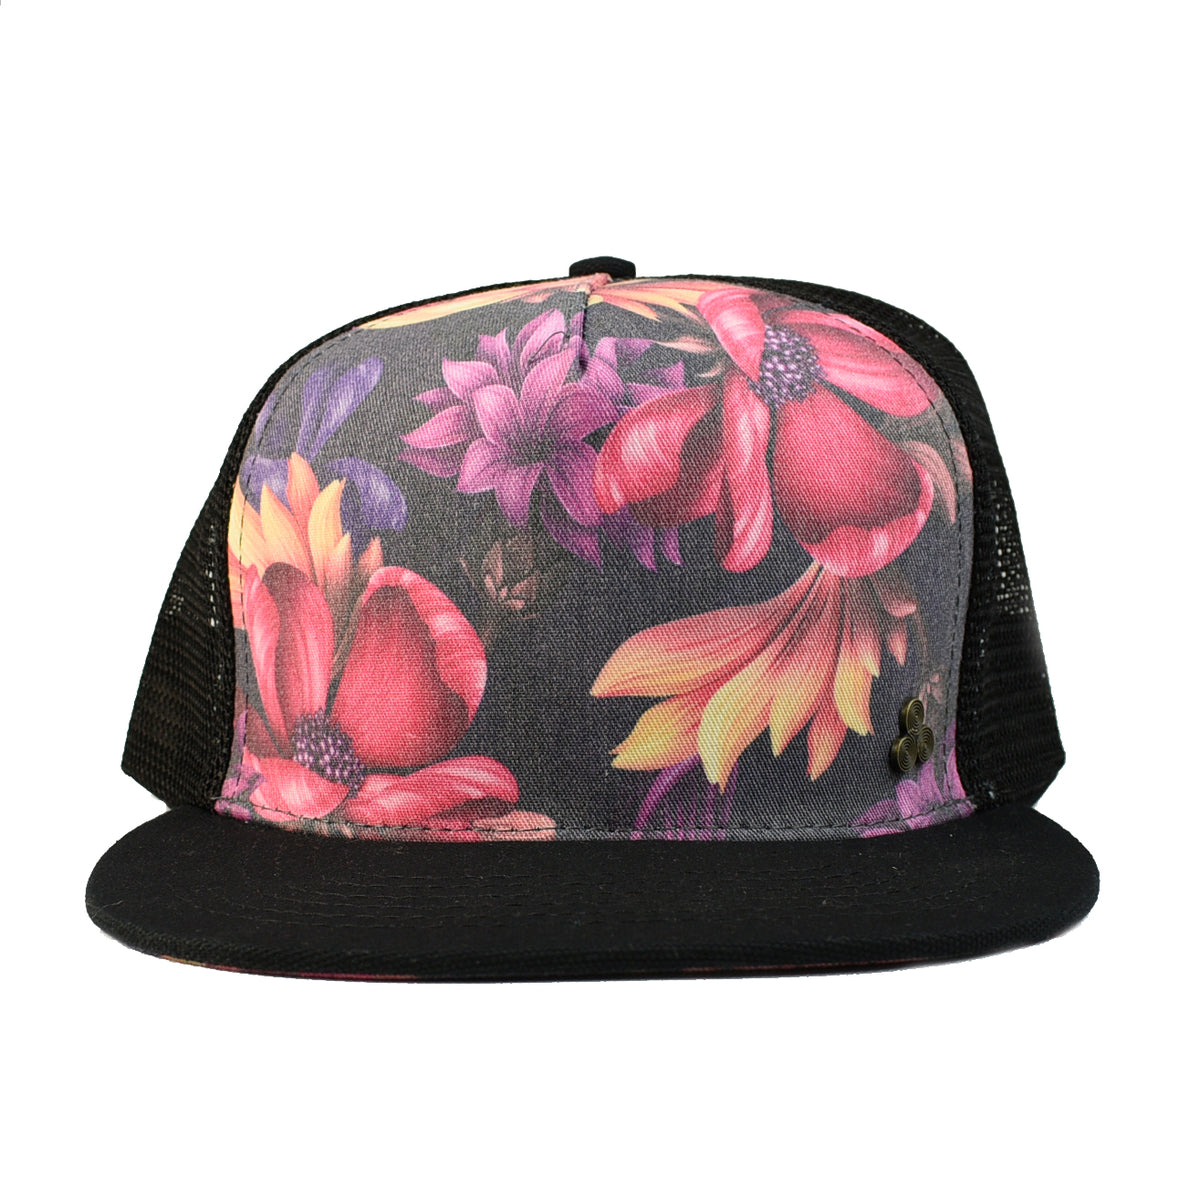 Floral Caps and Women| Eco-Friendly Men for Hat Trucker